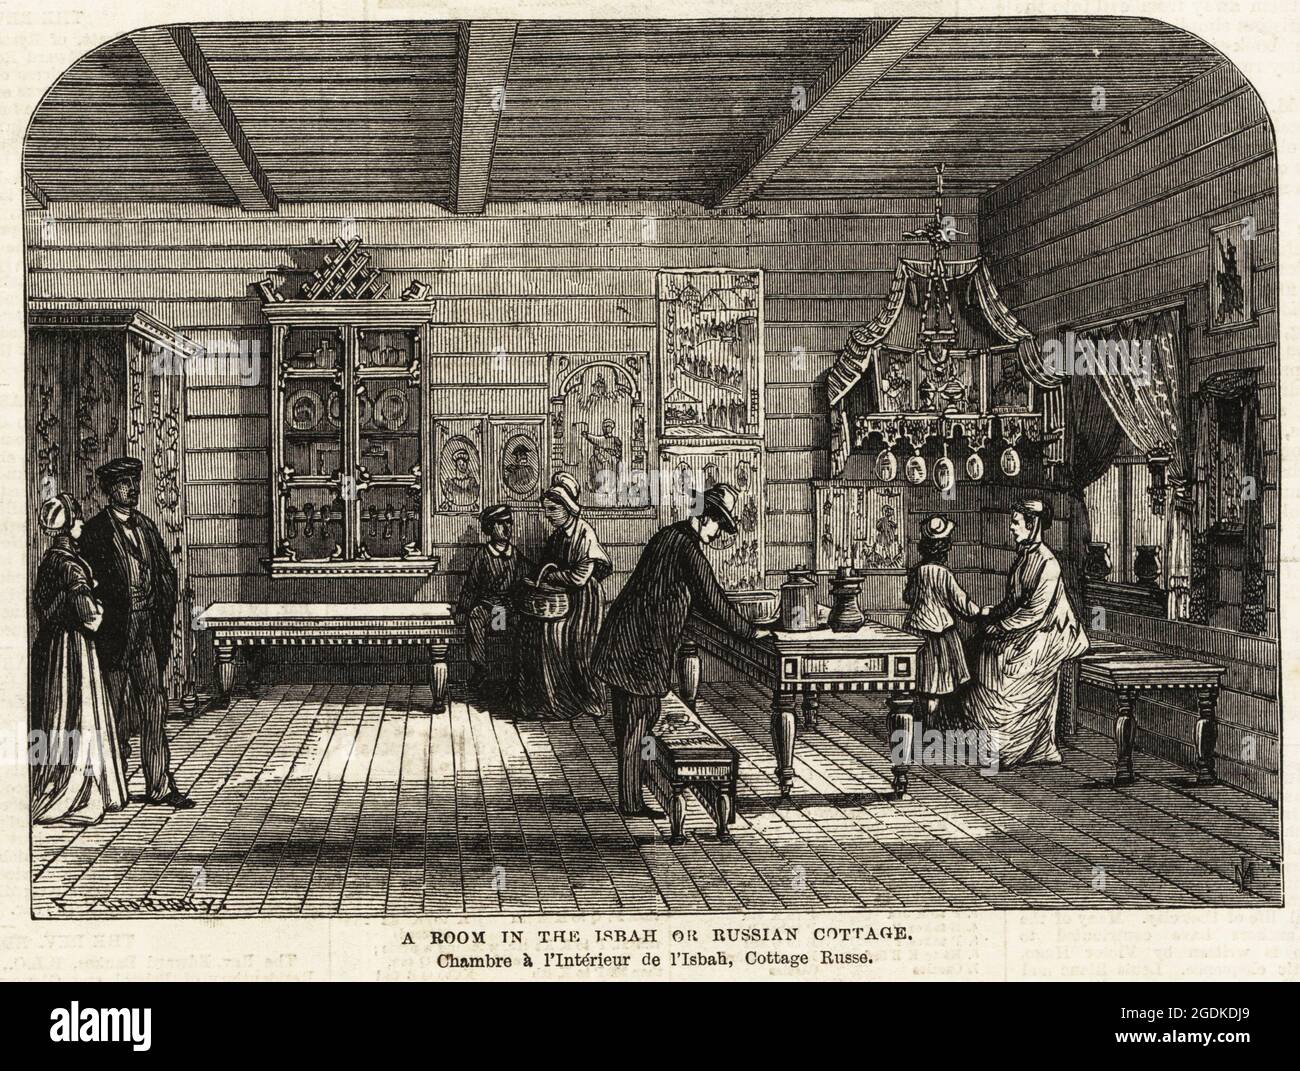 A room in the Isbah or Russian Cottage, Russian Departmnet, Paris Exposition Universelle, 1867. Visitors in a traditional Russian log cabin. Woodcut engraving by JM from the Supplement to the Illustrated London News, London, June 8, 1867. Stock Photo